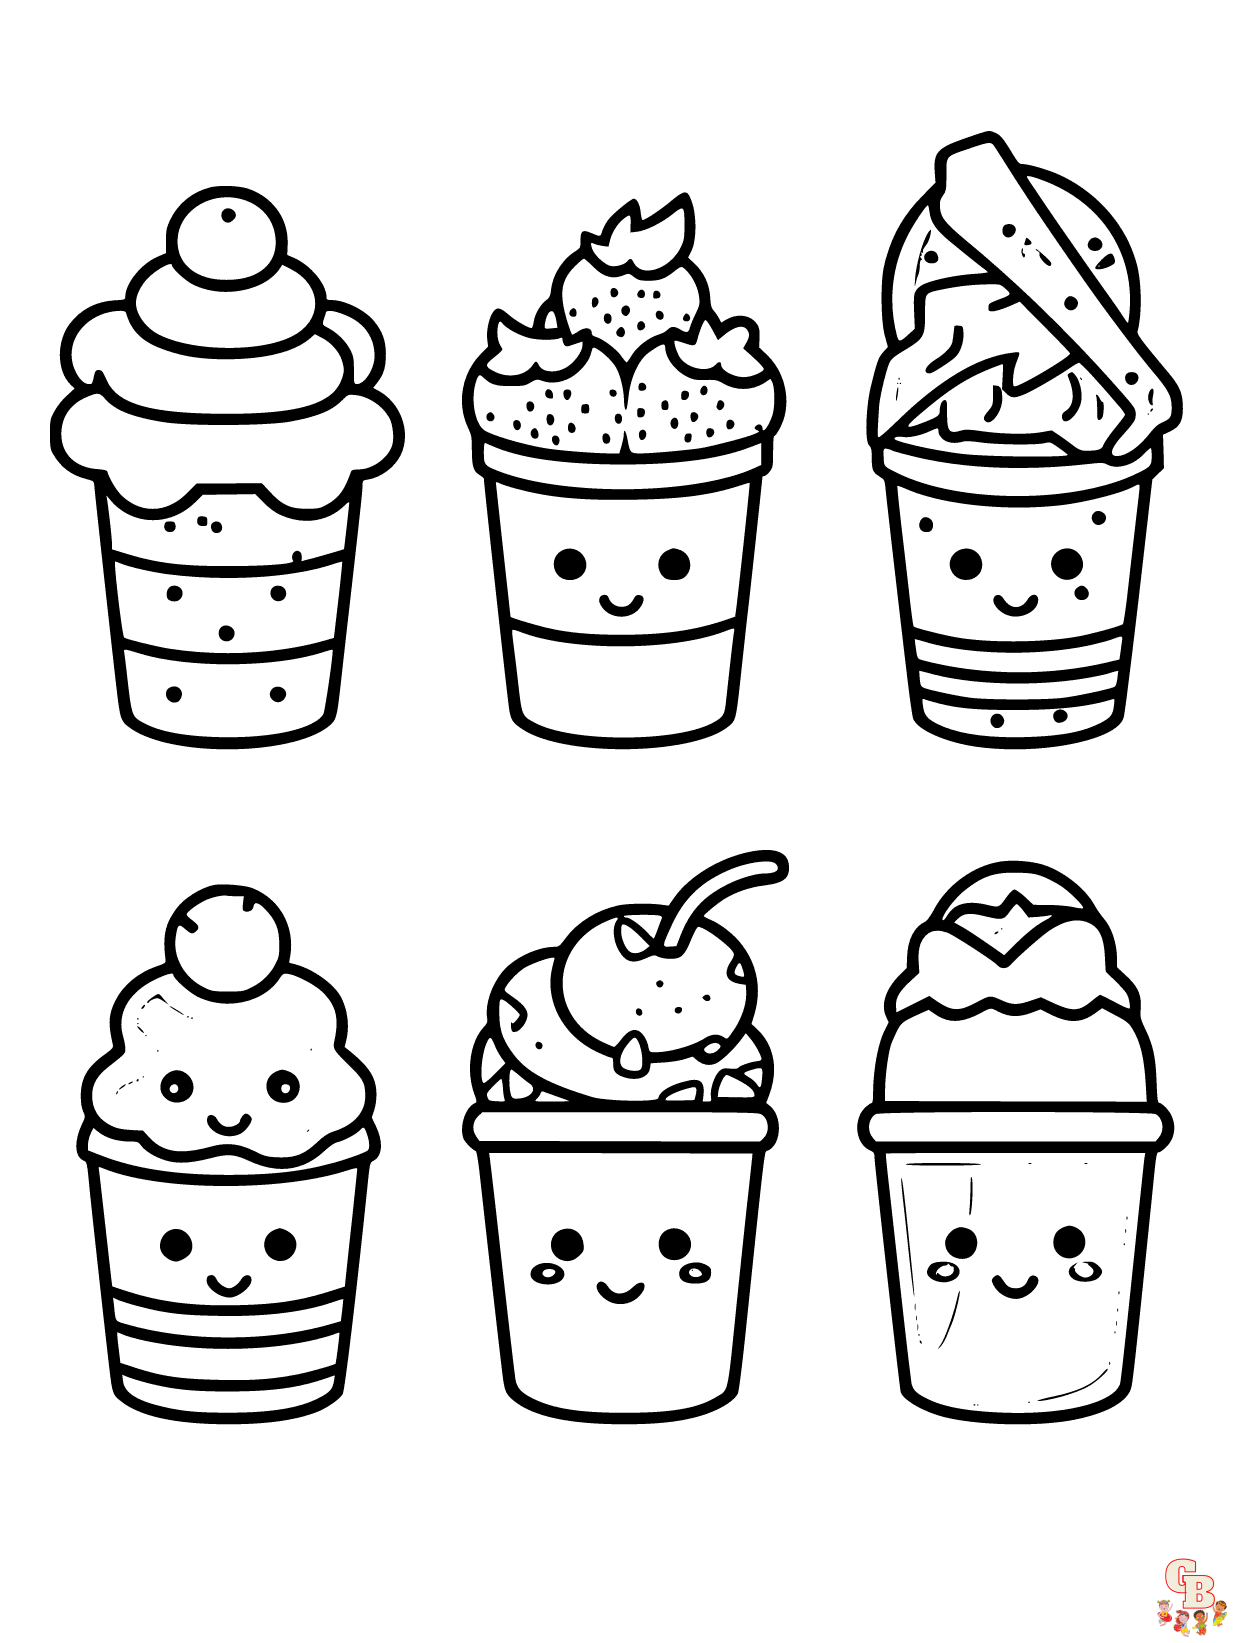 Food coloring pages printable free and easy to use for kids